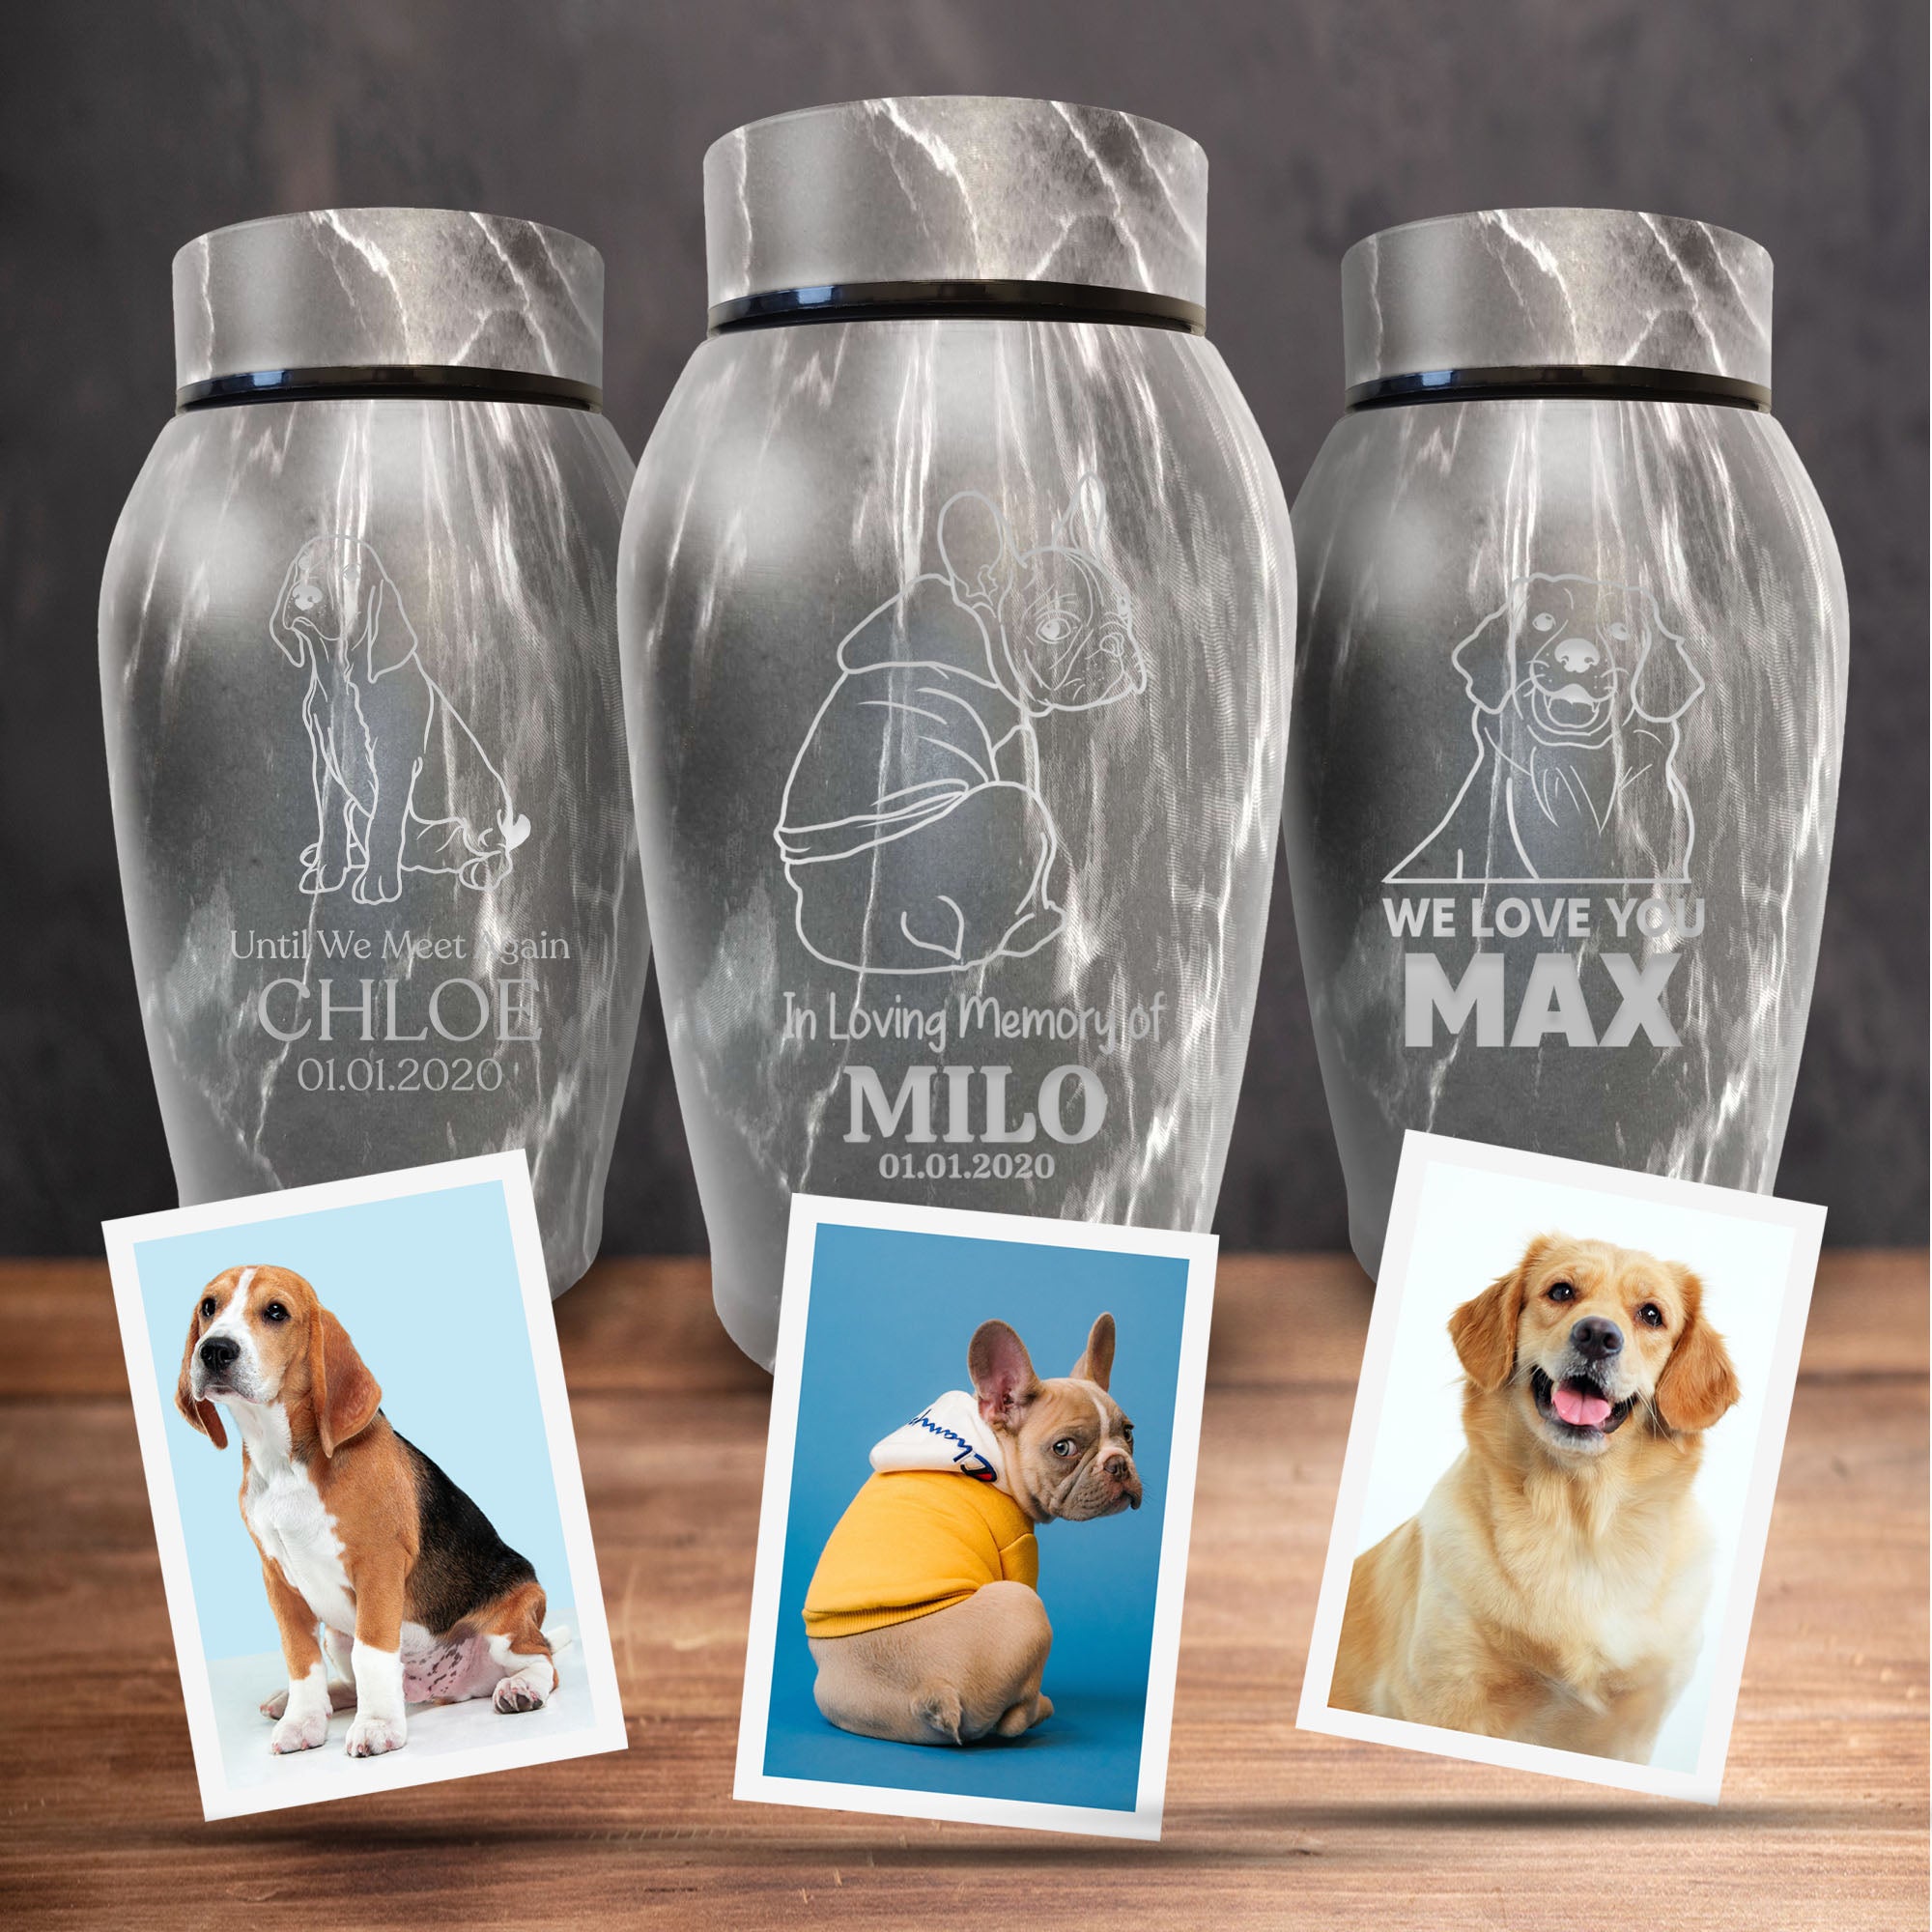 Custom Engraved Pet Photo/Image Stone Gray Urn - Personalized Textured Cremation Urn - Stainless Steel Urn for Dog Memorial Ashes | Gray